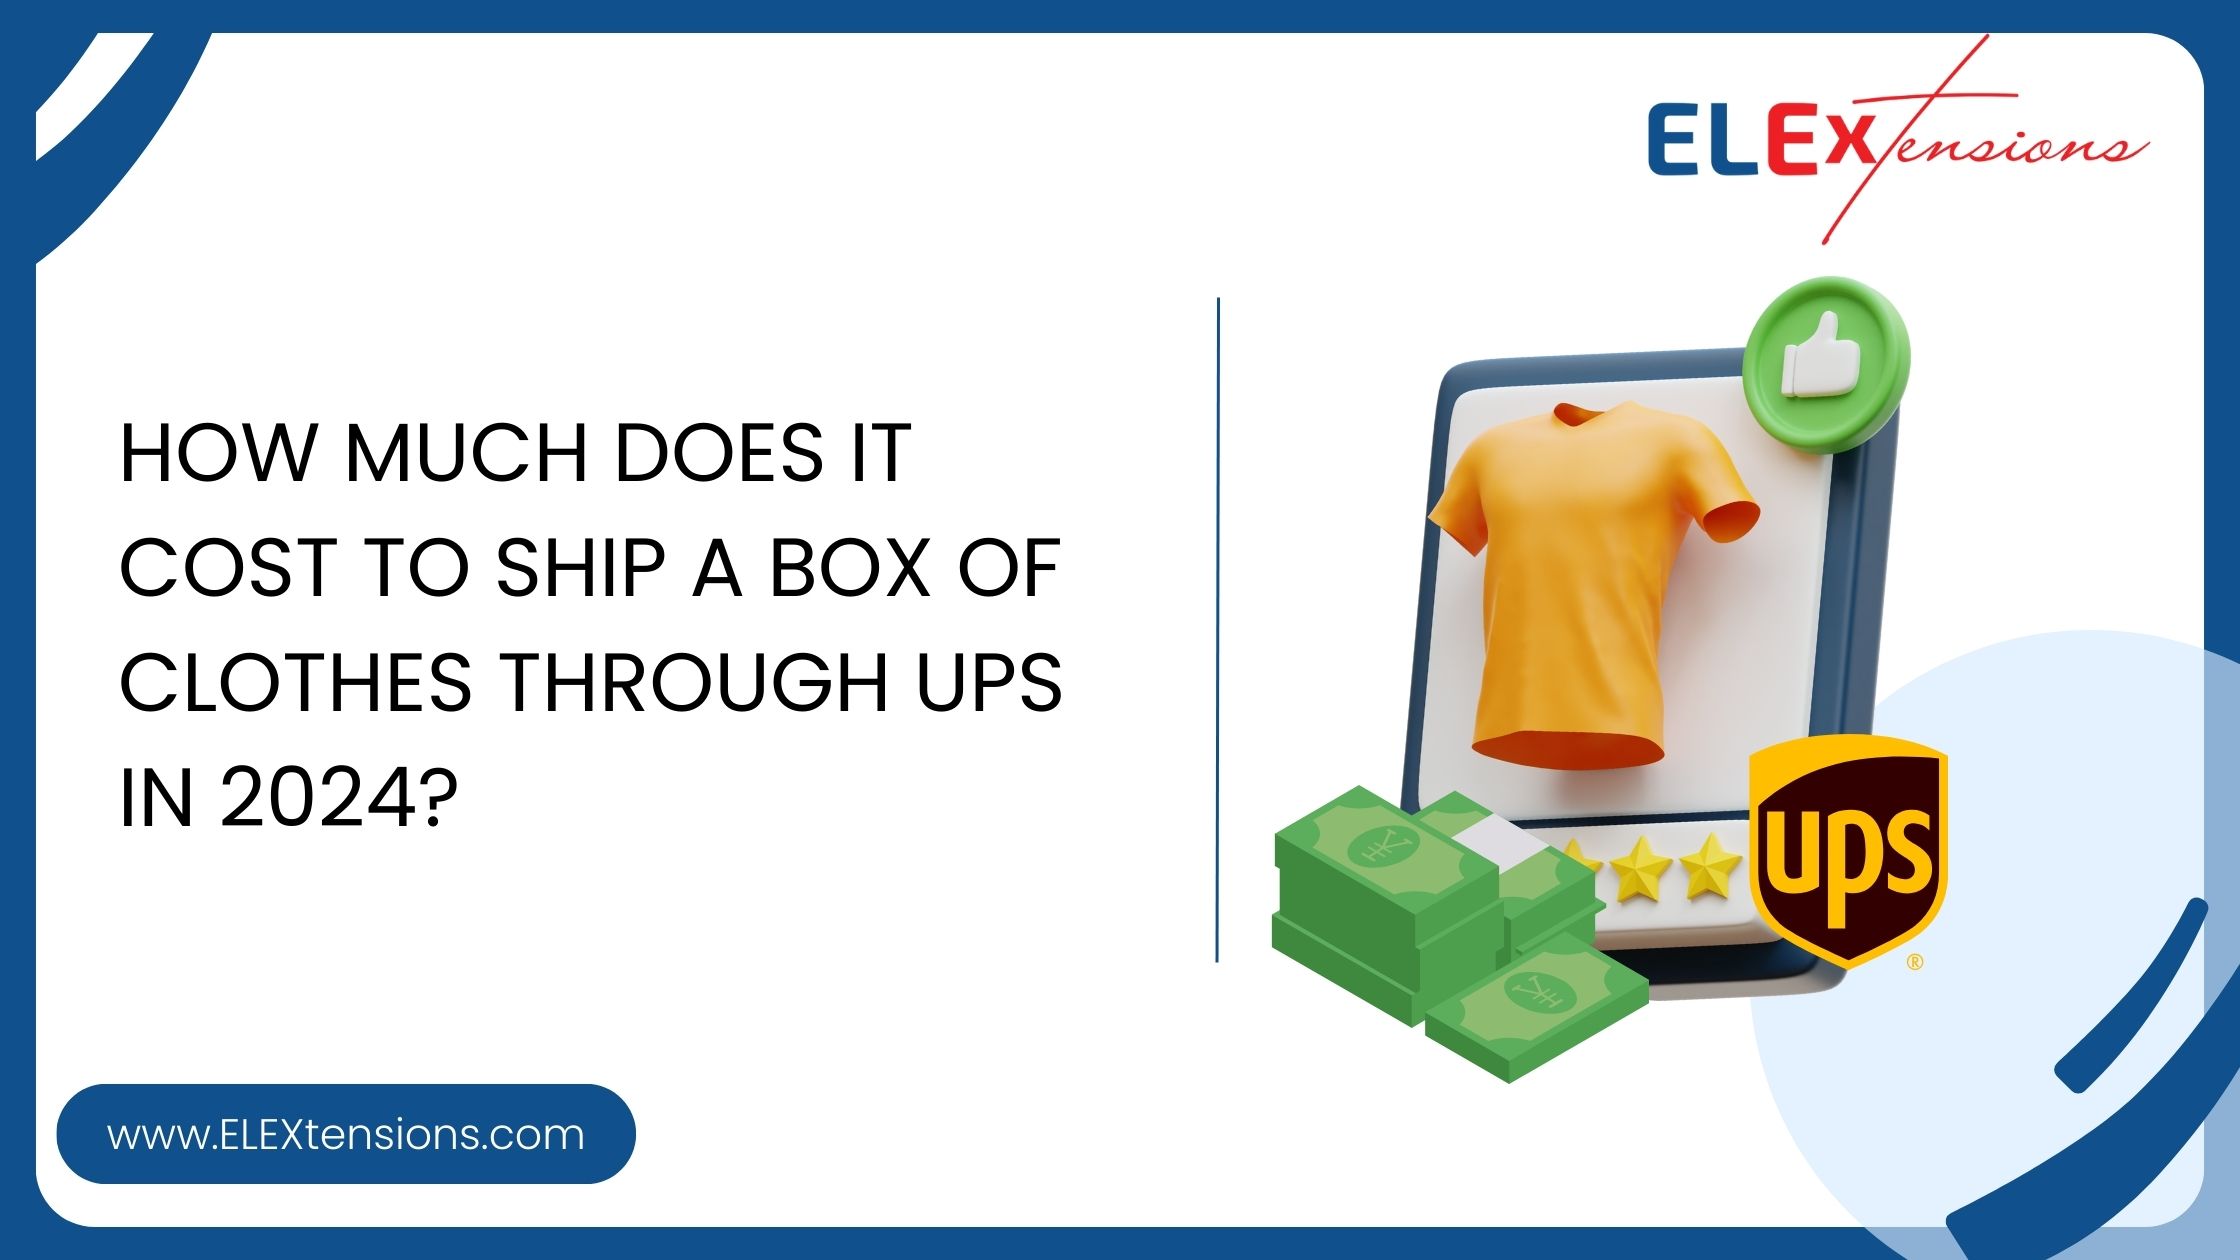 How Much Does it Cost to Ship a Box of Clothes Through UPS in 2024?